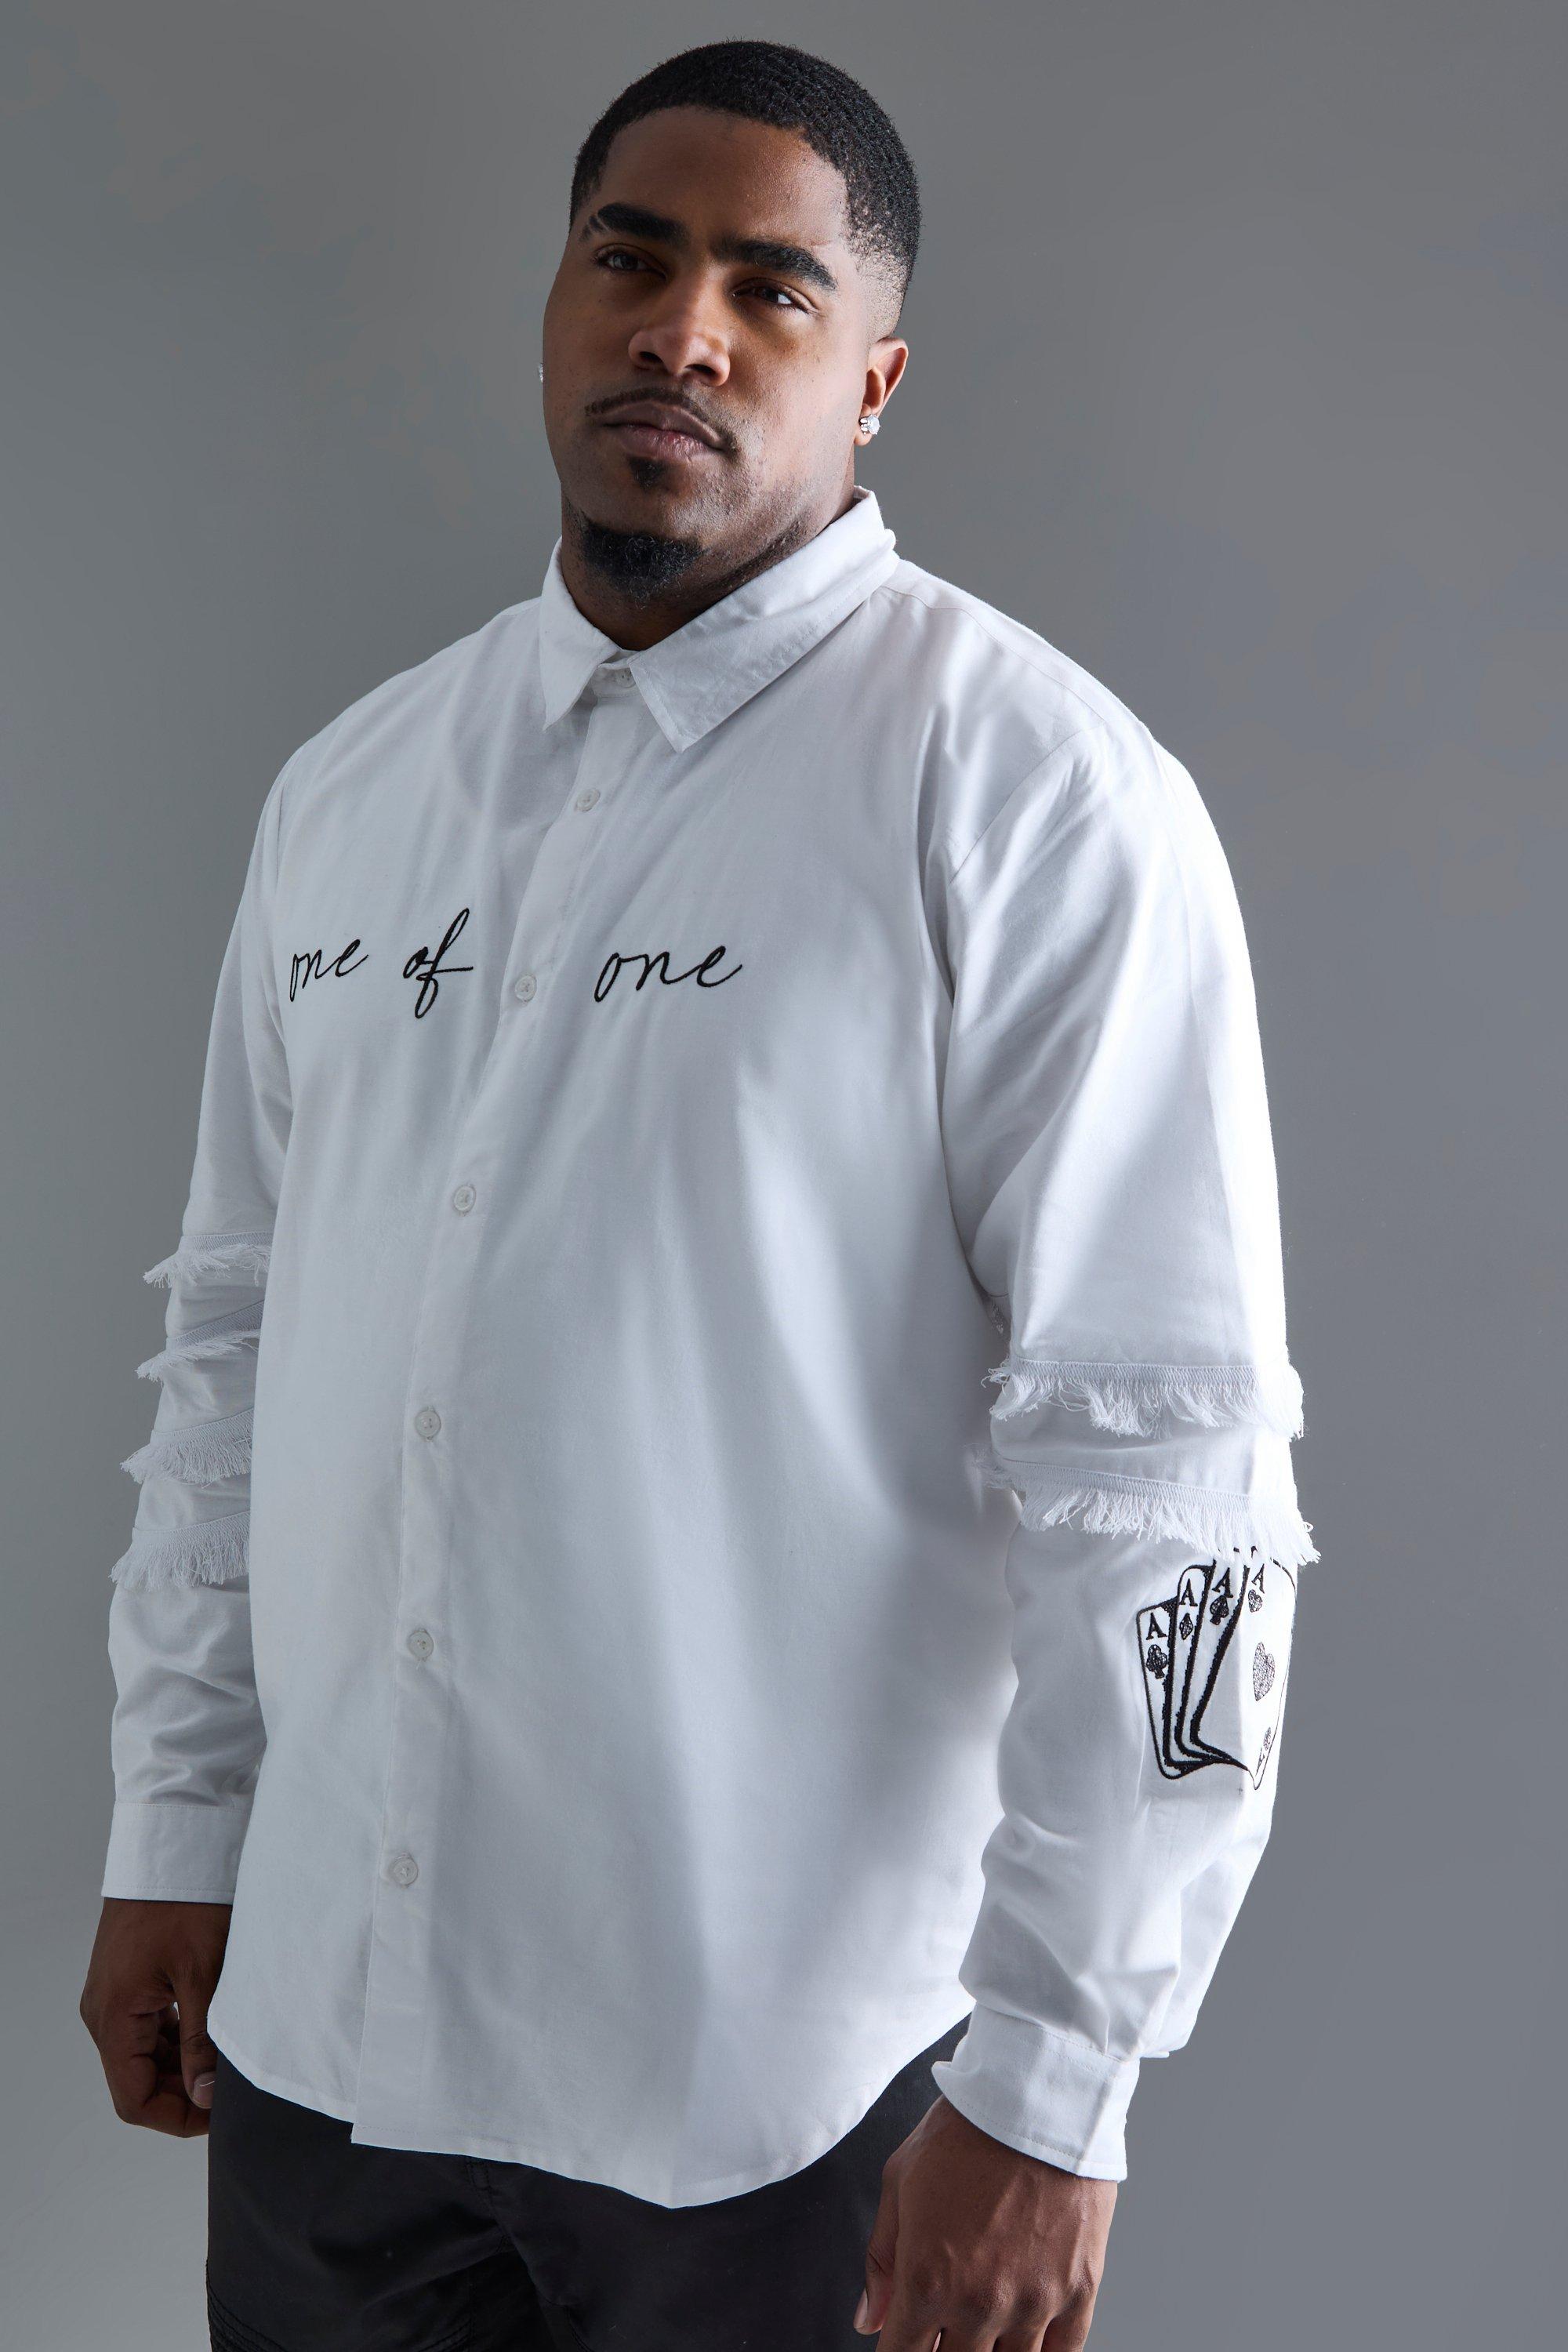 Mens White Plus Longsleeve One Of One Embroidered Shirt, White